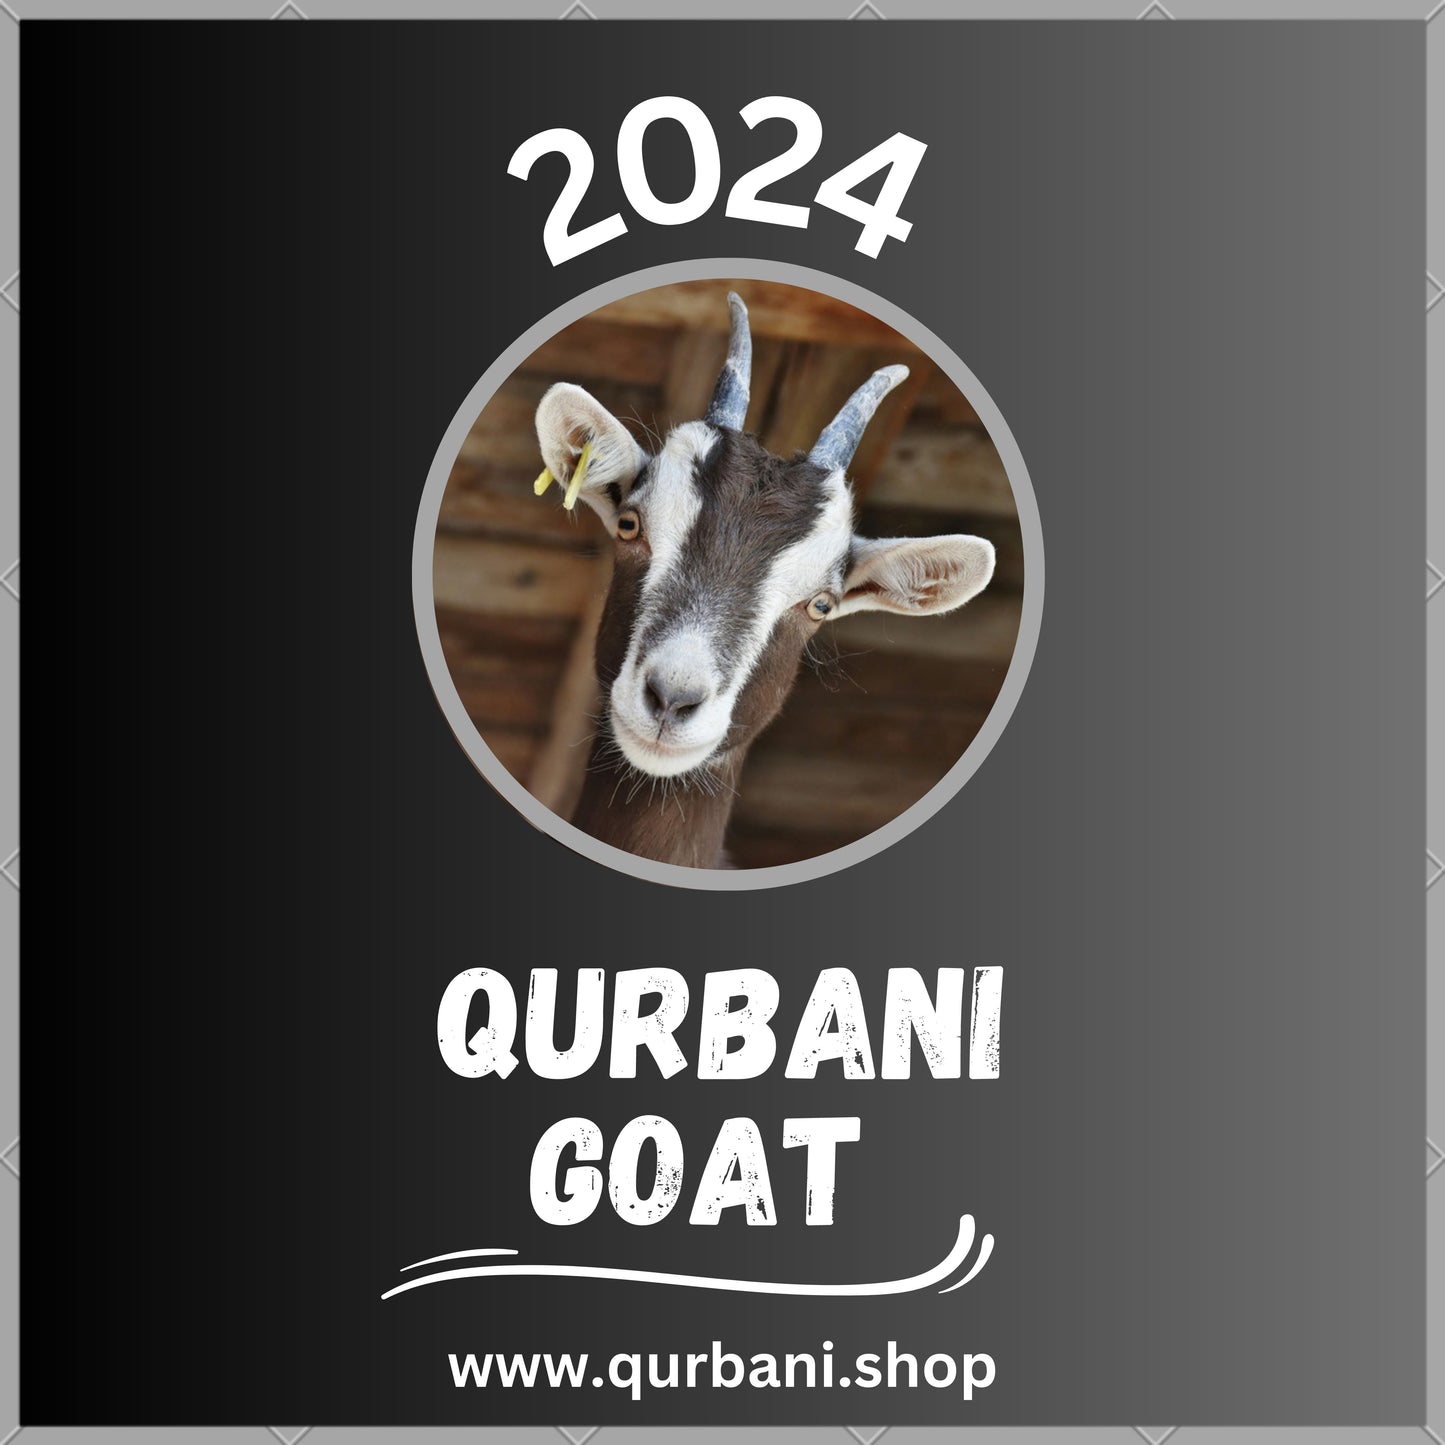 Empower Others: Donate for Qurbani and Share the Blessings